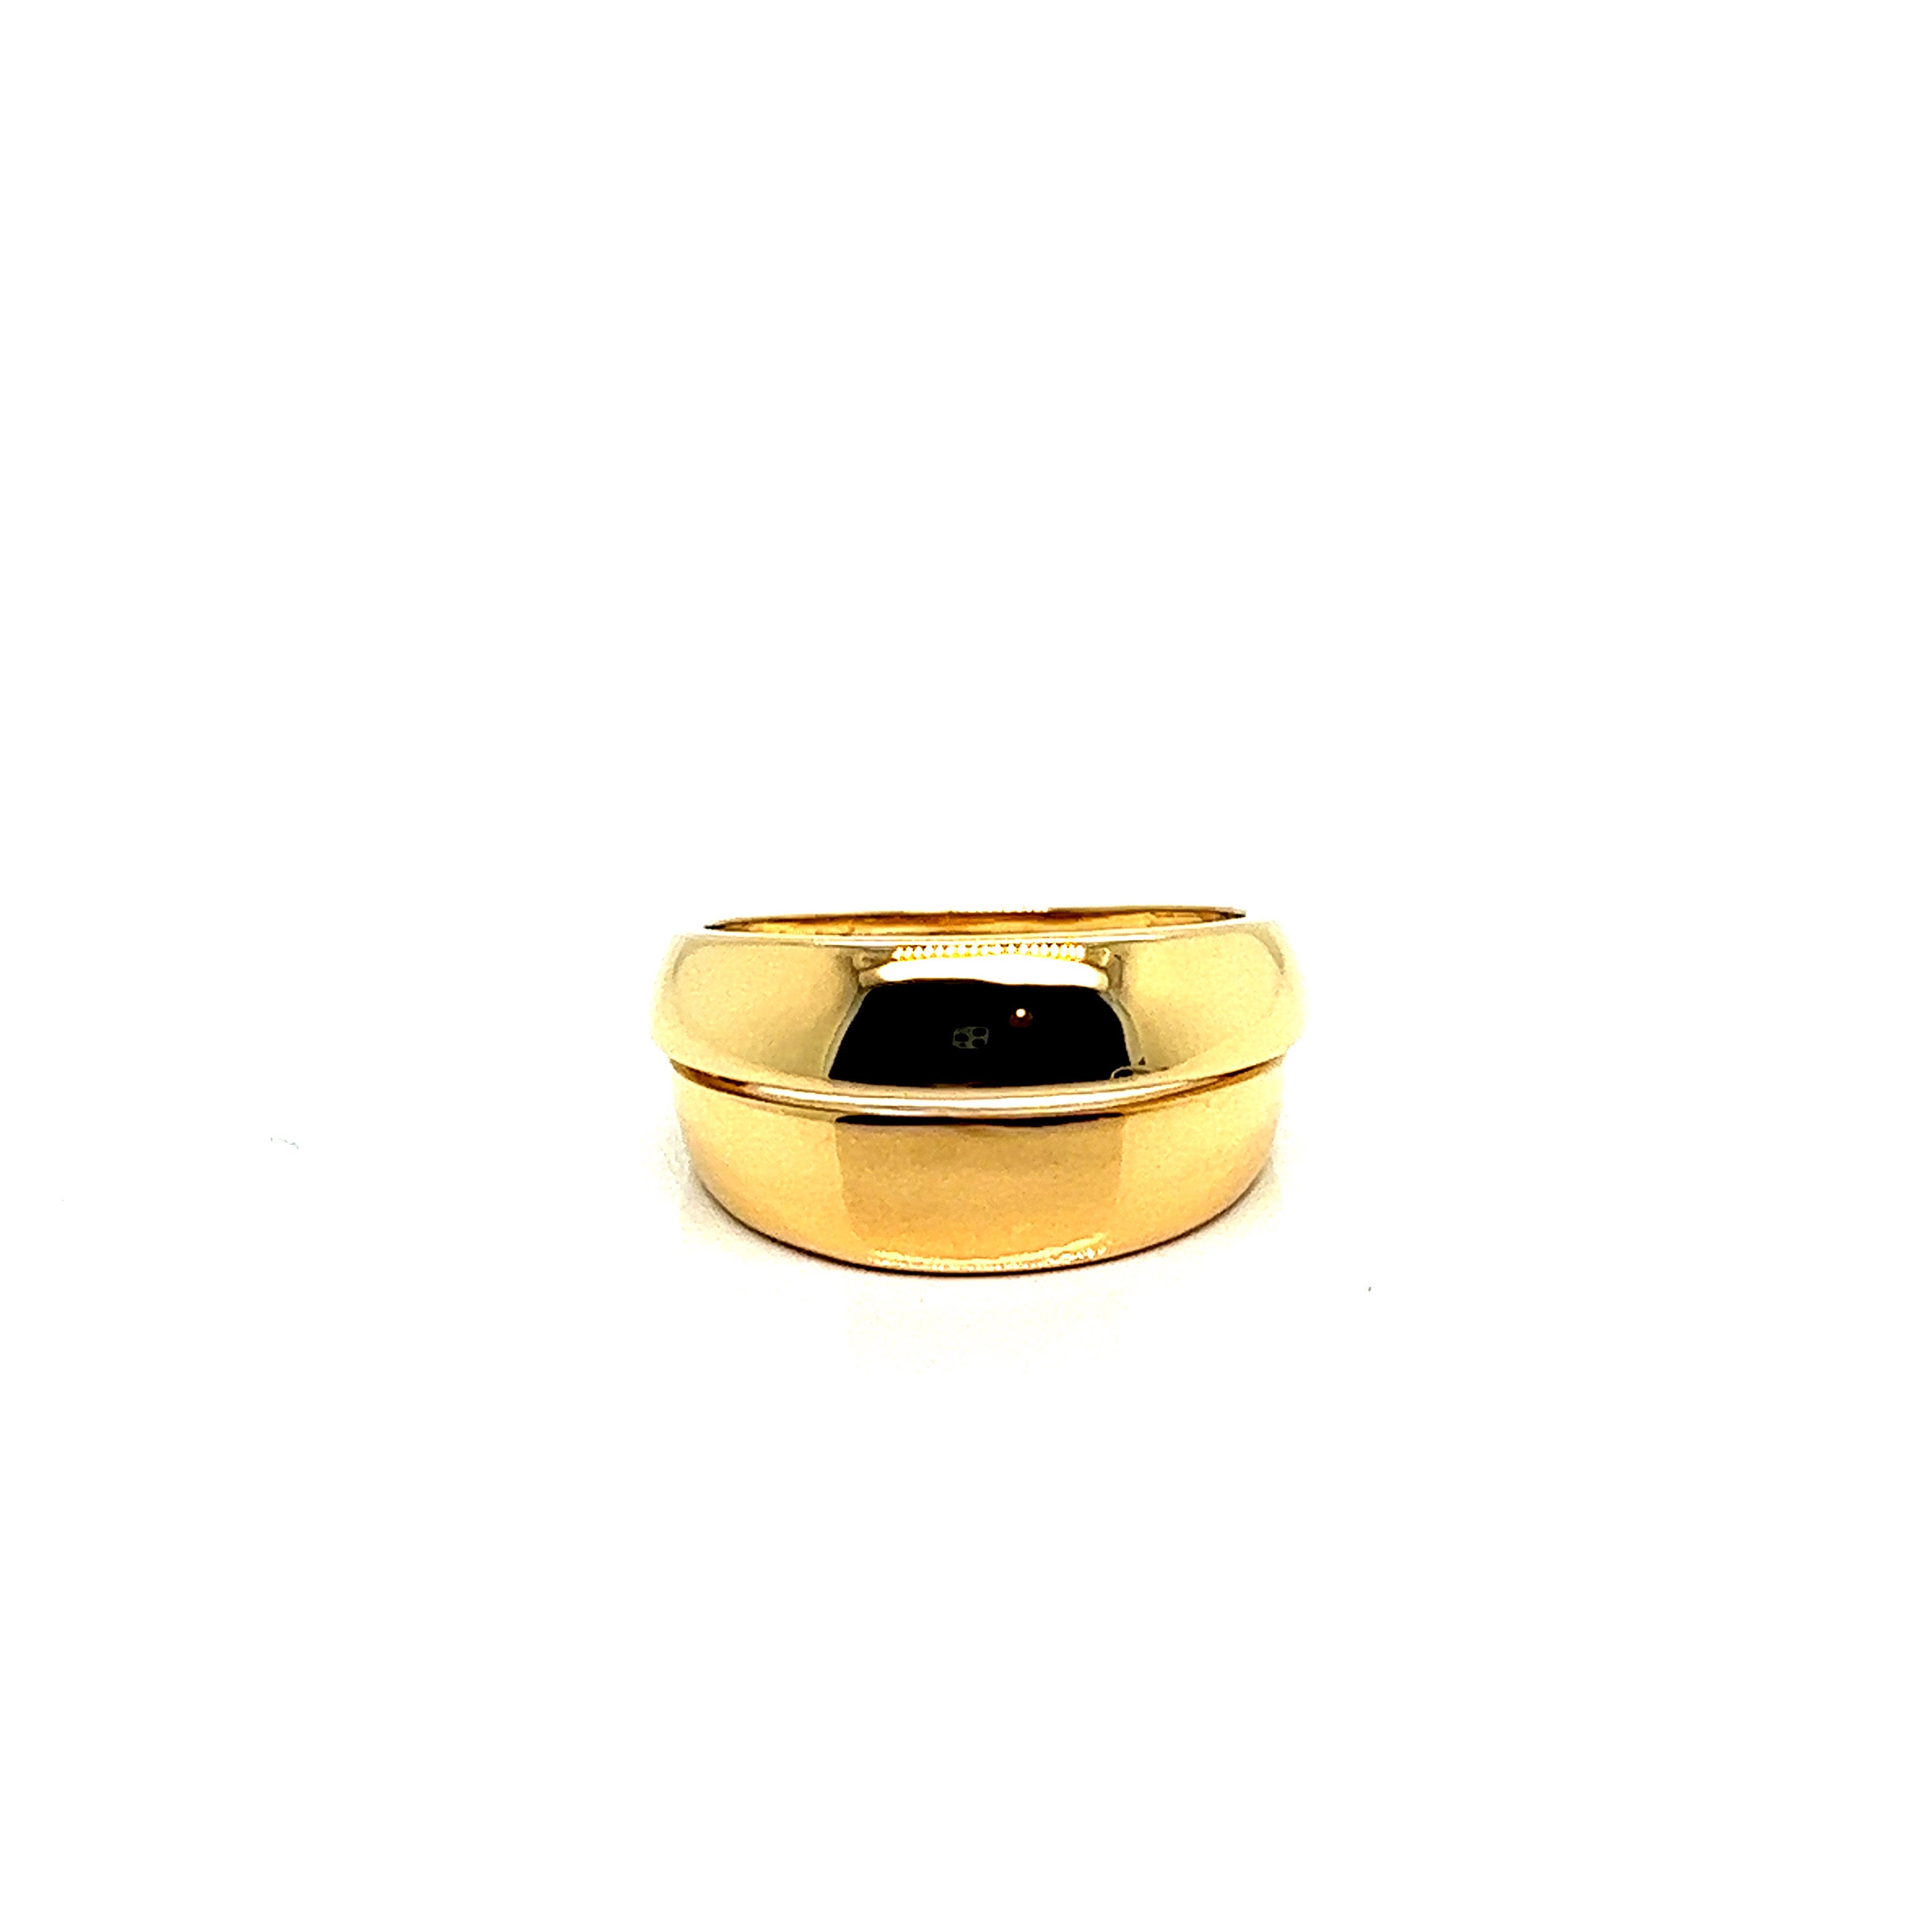 French Ring with Middle Opening 18 Carat Yellow Gold 

Beautiful signet ring all in yellow gold 18 carats. With its opening in the middle, this ring lets see your skin for a chic and delicate side

Our workshop will be pleased to offer you this ring